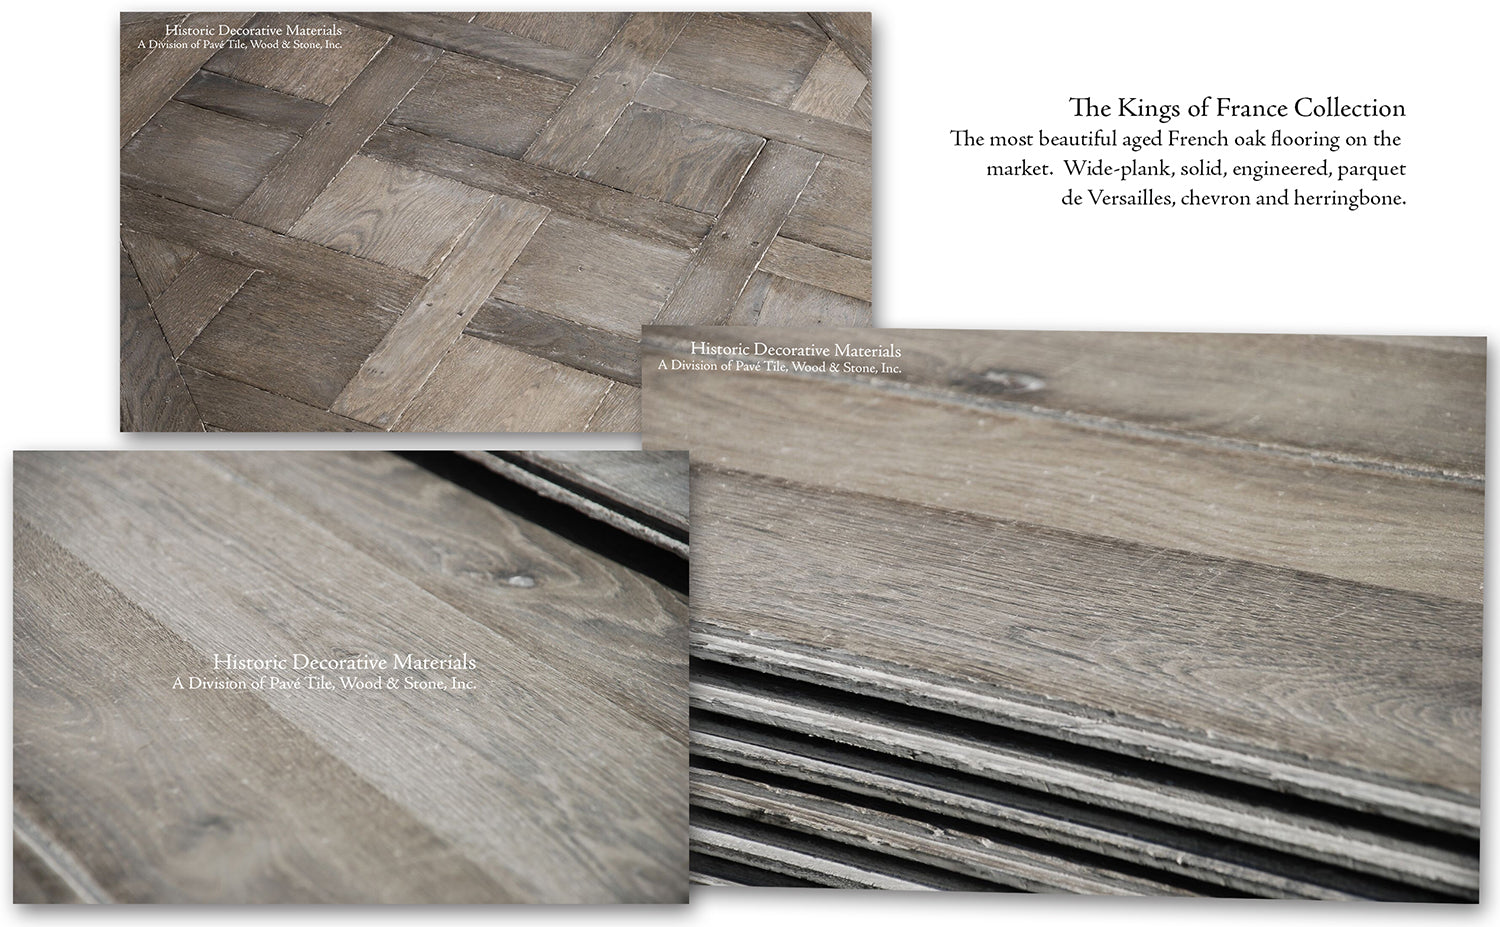 Interior designers choose for their interior designs reclaimed French limestone flooring, vintage and aged French limestone floors, French reclaimed terra cotta tile hexagons and hardwood French oak flooring for luxury interiors and farmhouse interior designs.